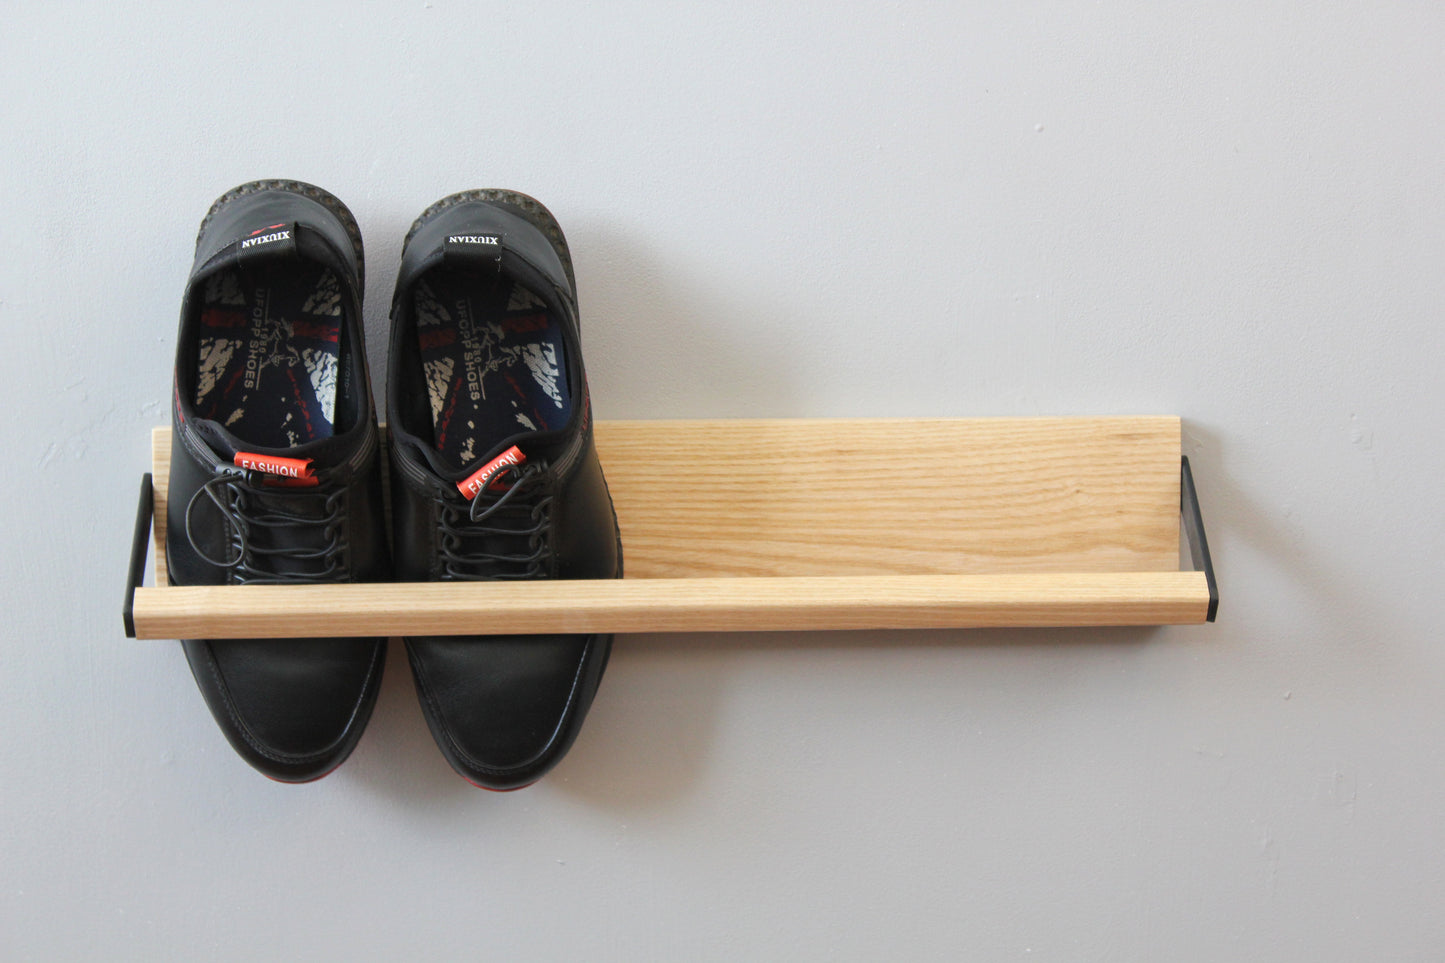 Wall shelf with holder 50x12x2 cm - "Wooden Enthusism"